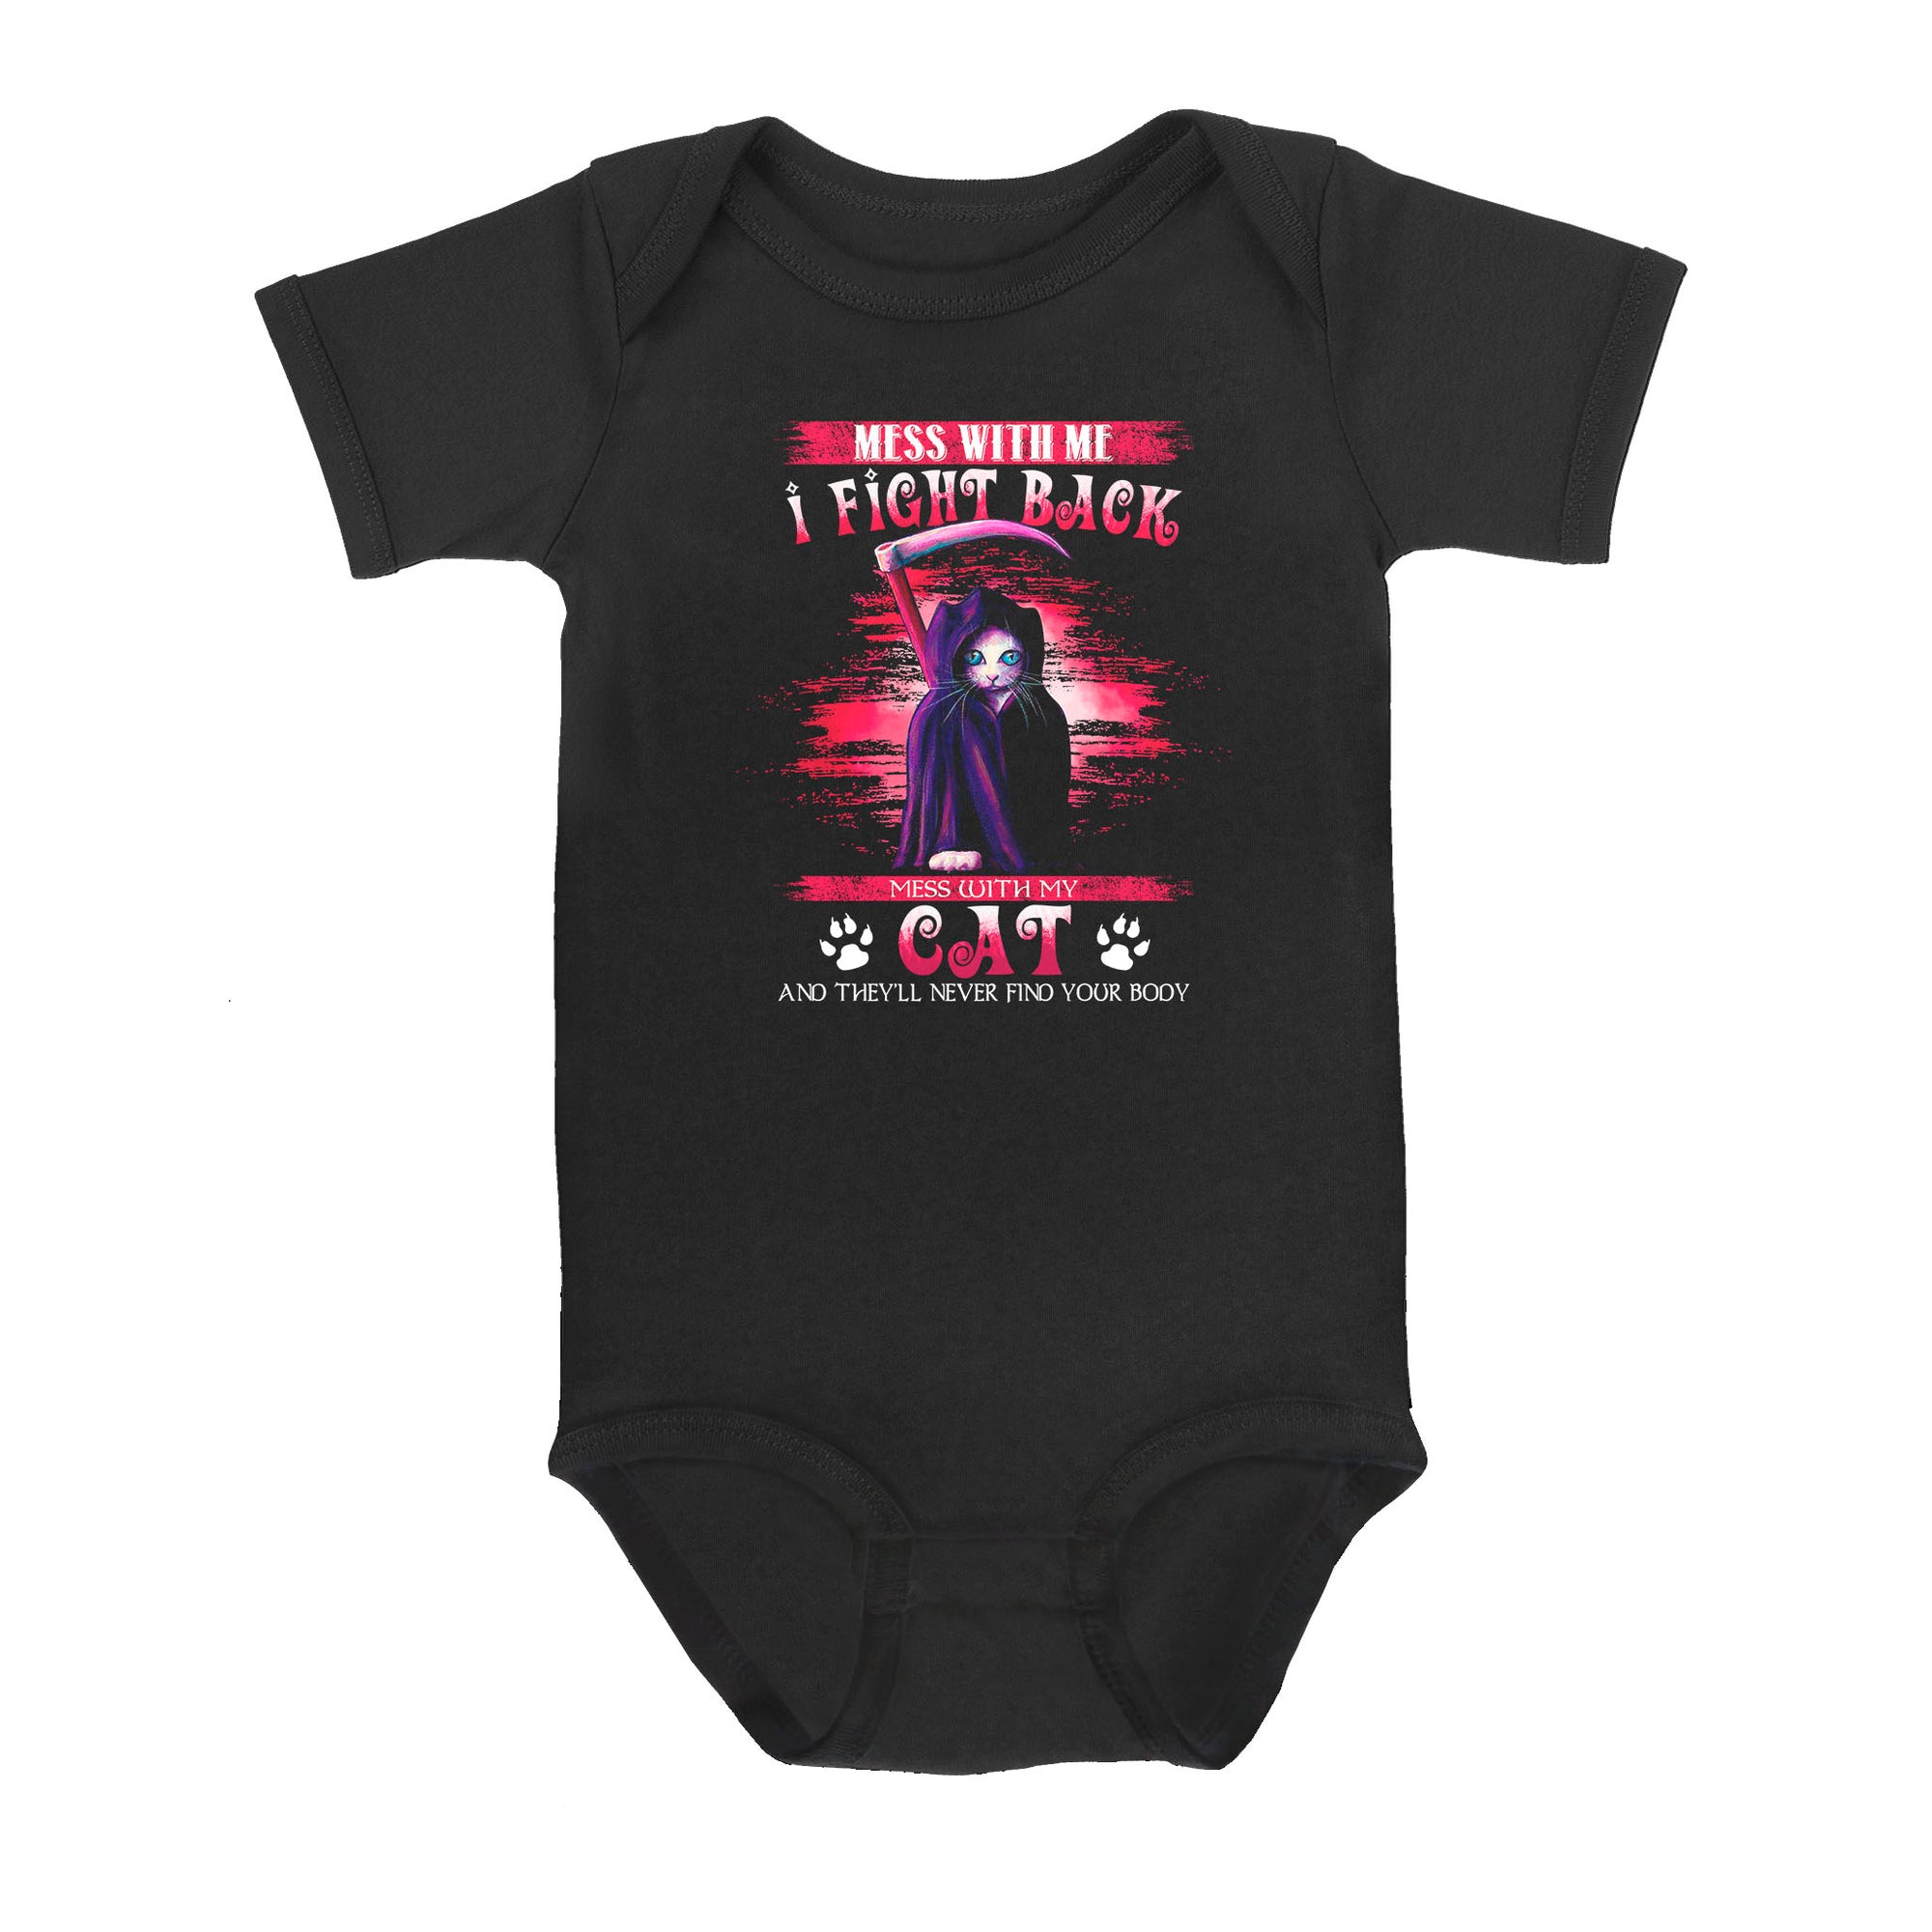 Cat Mess With Me I Fight Back Mess With My Cat And They’ll Never Find Your Body - Baby Onesie